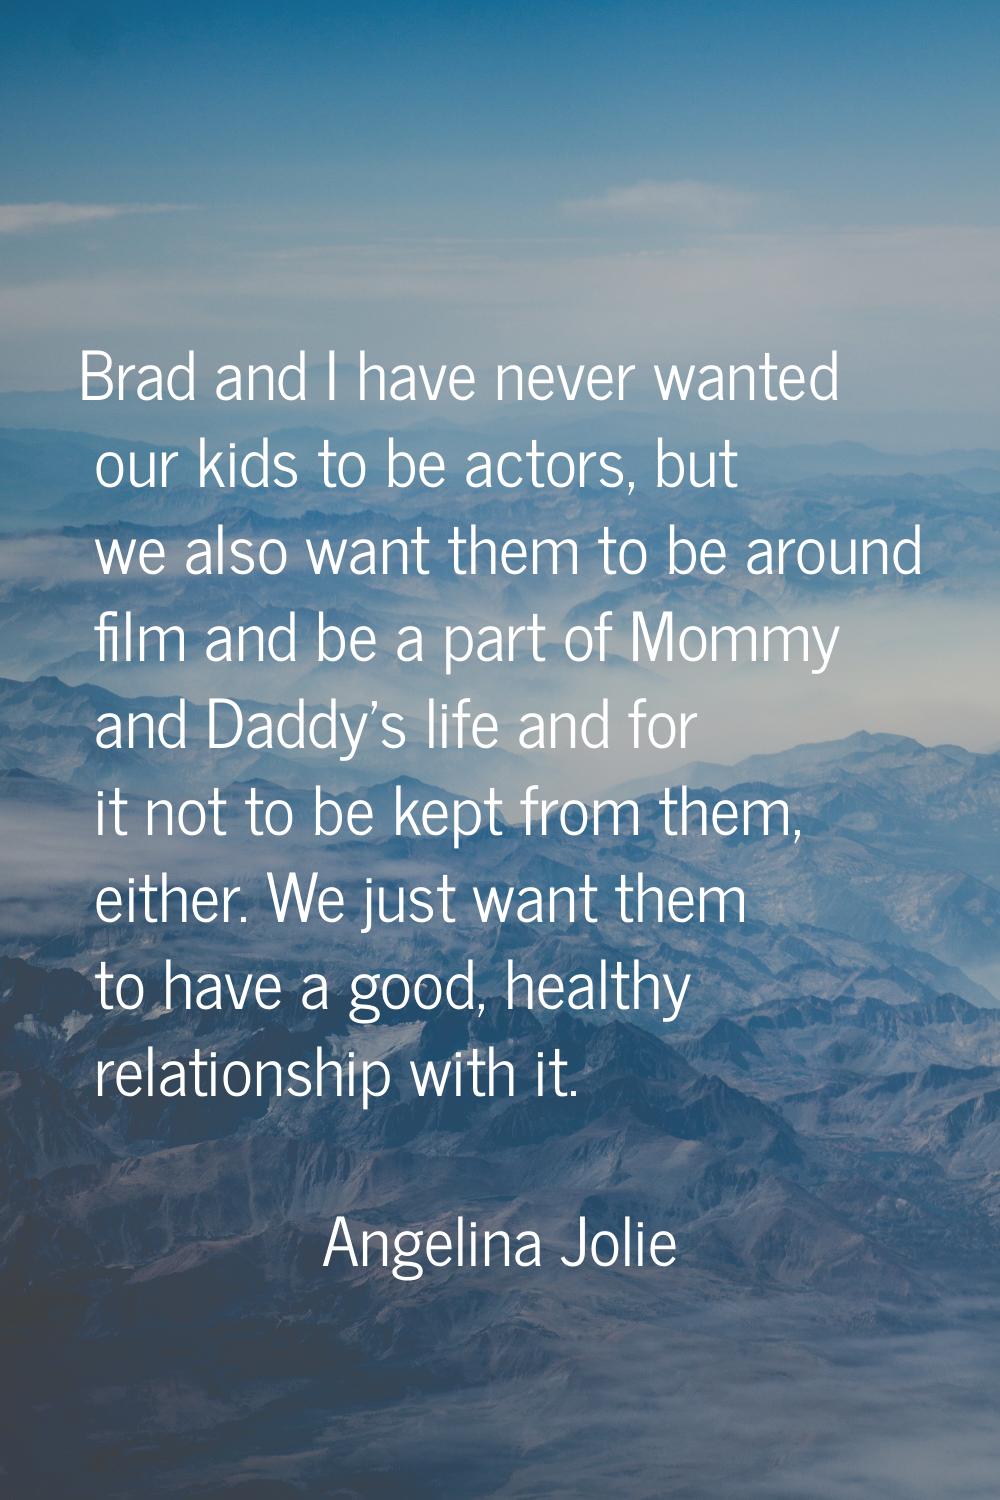 Brad and I have never wanted our kids to be actors, but we also want them to be around film and be 